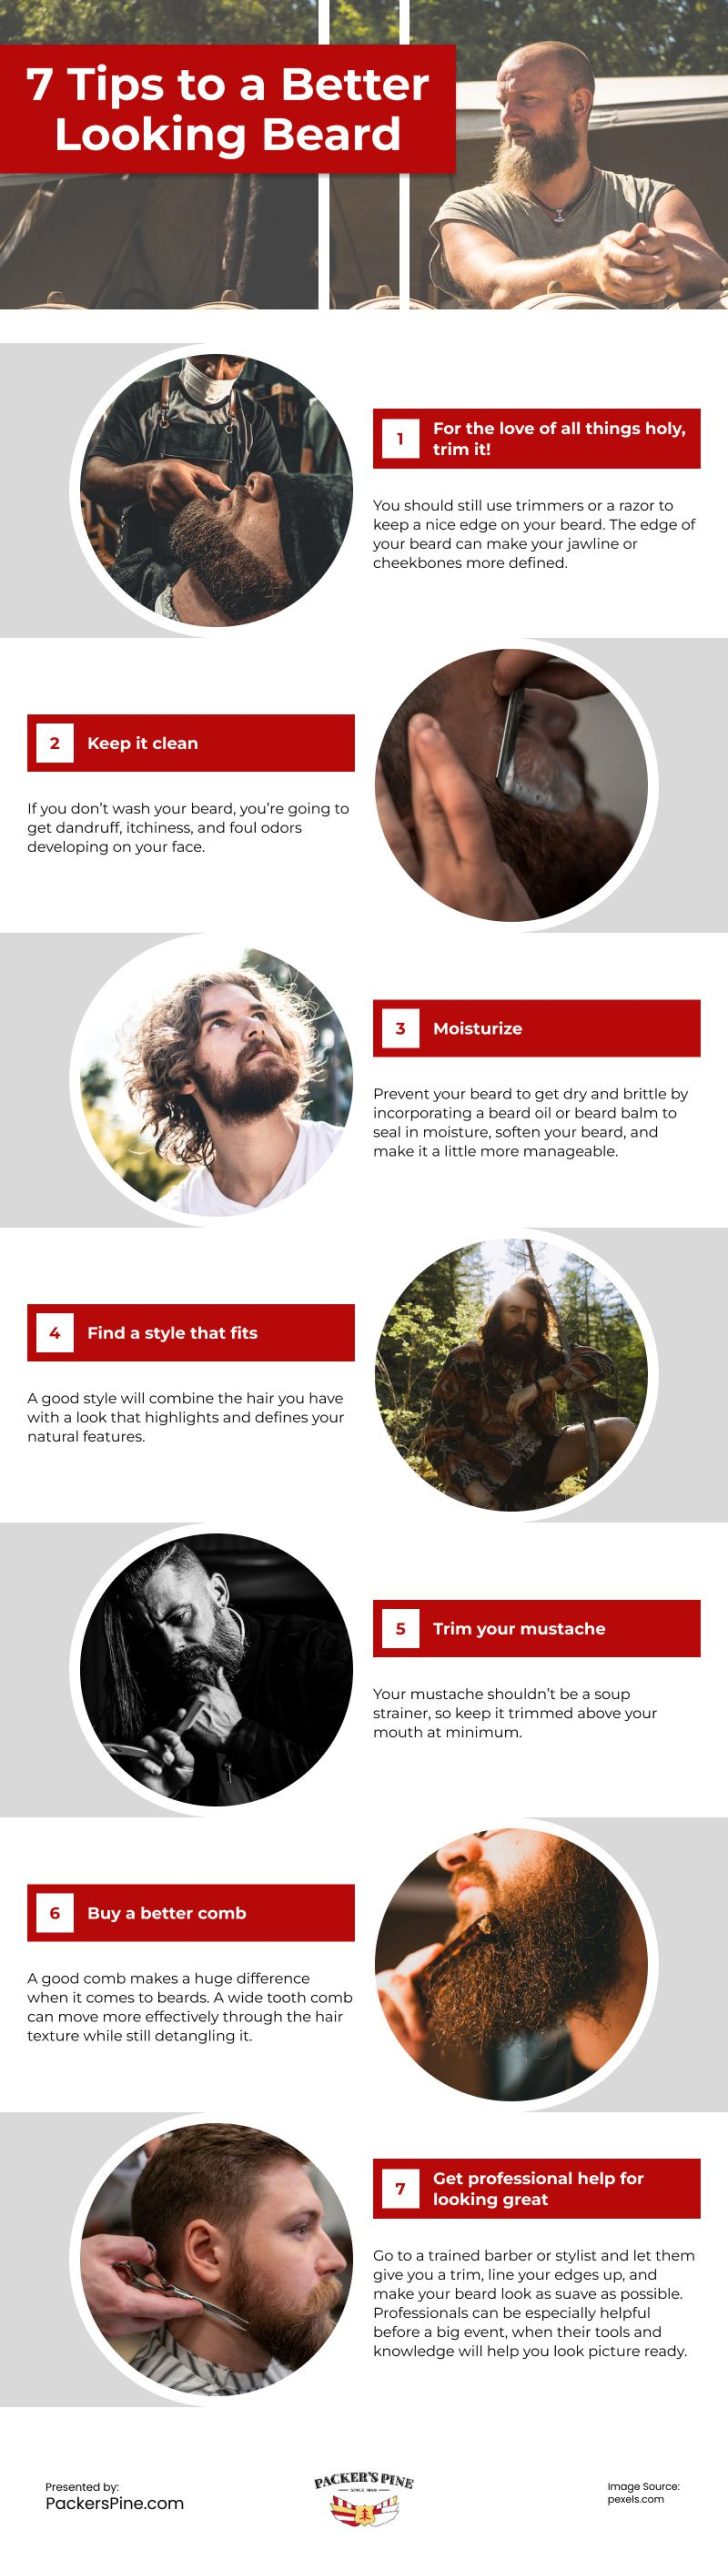 7 Tips to a Better Looking Beard Infographic